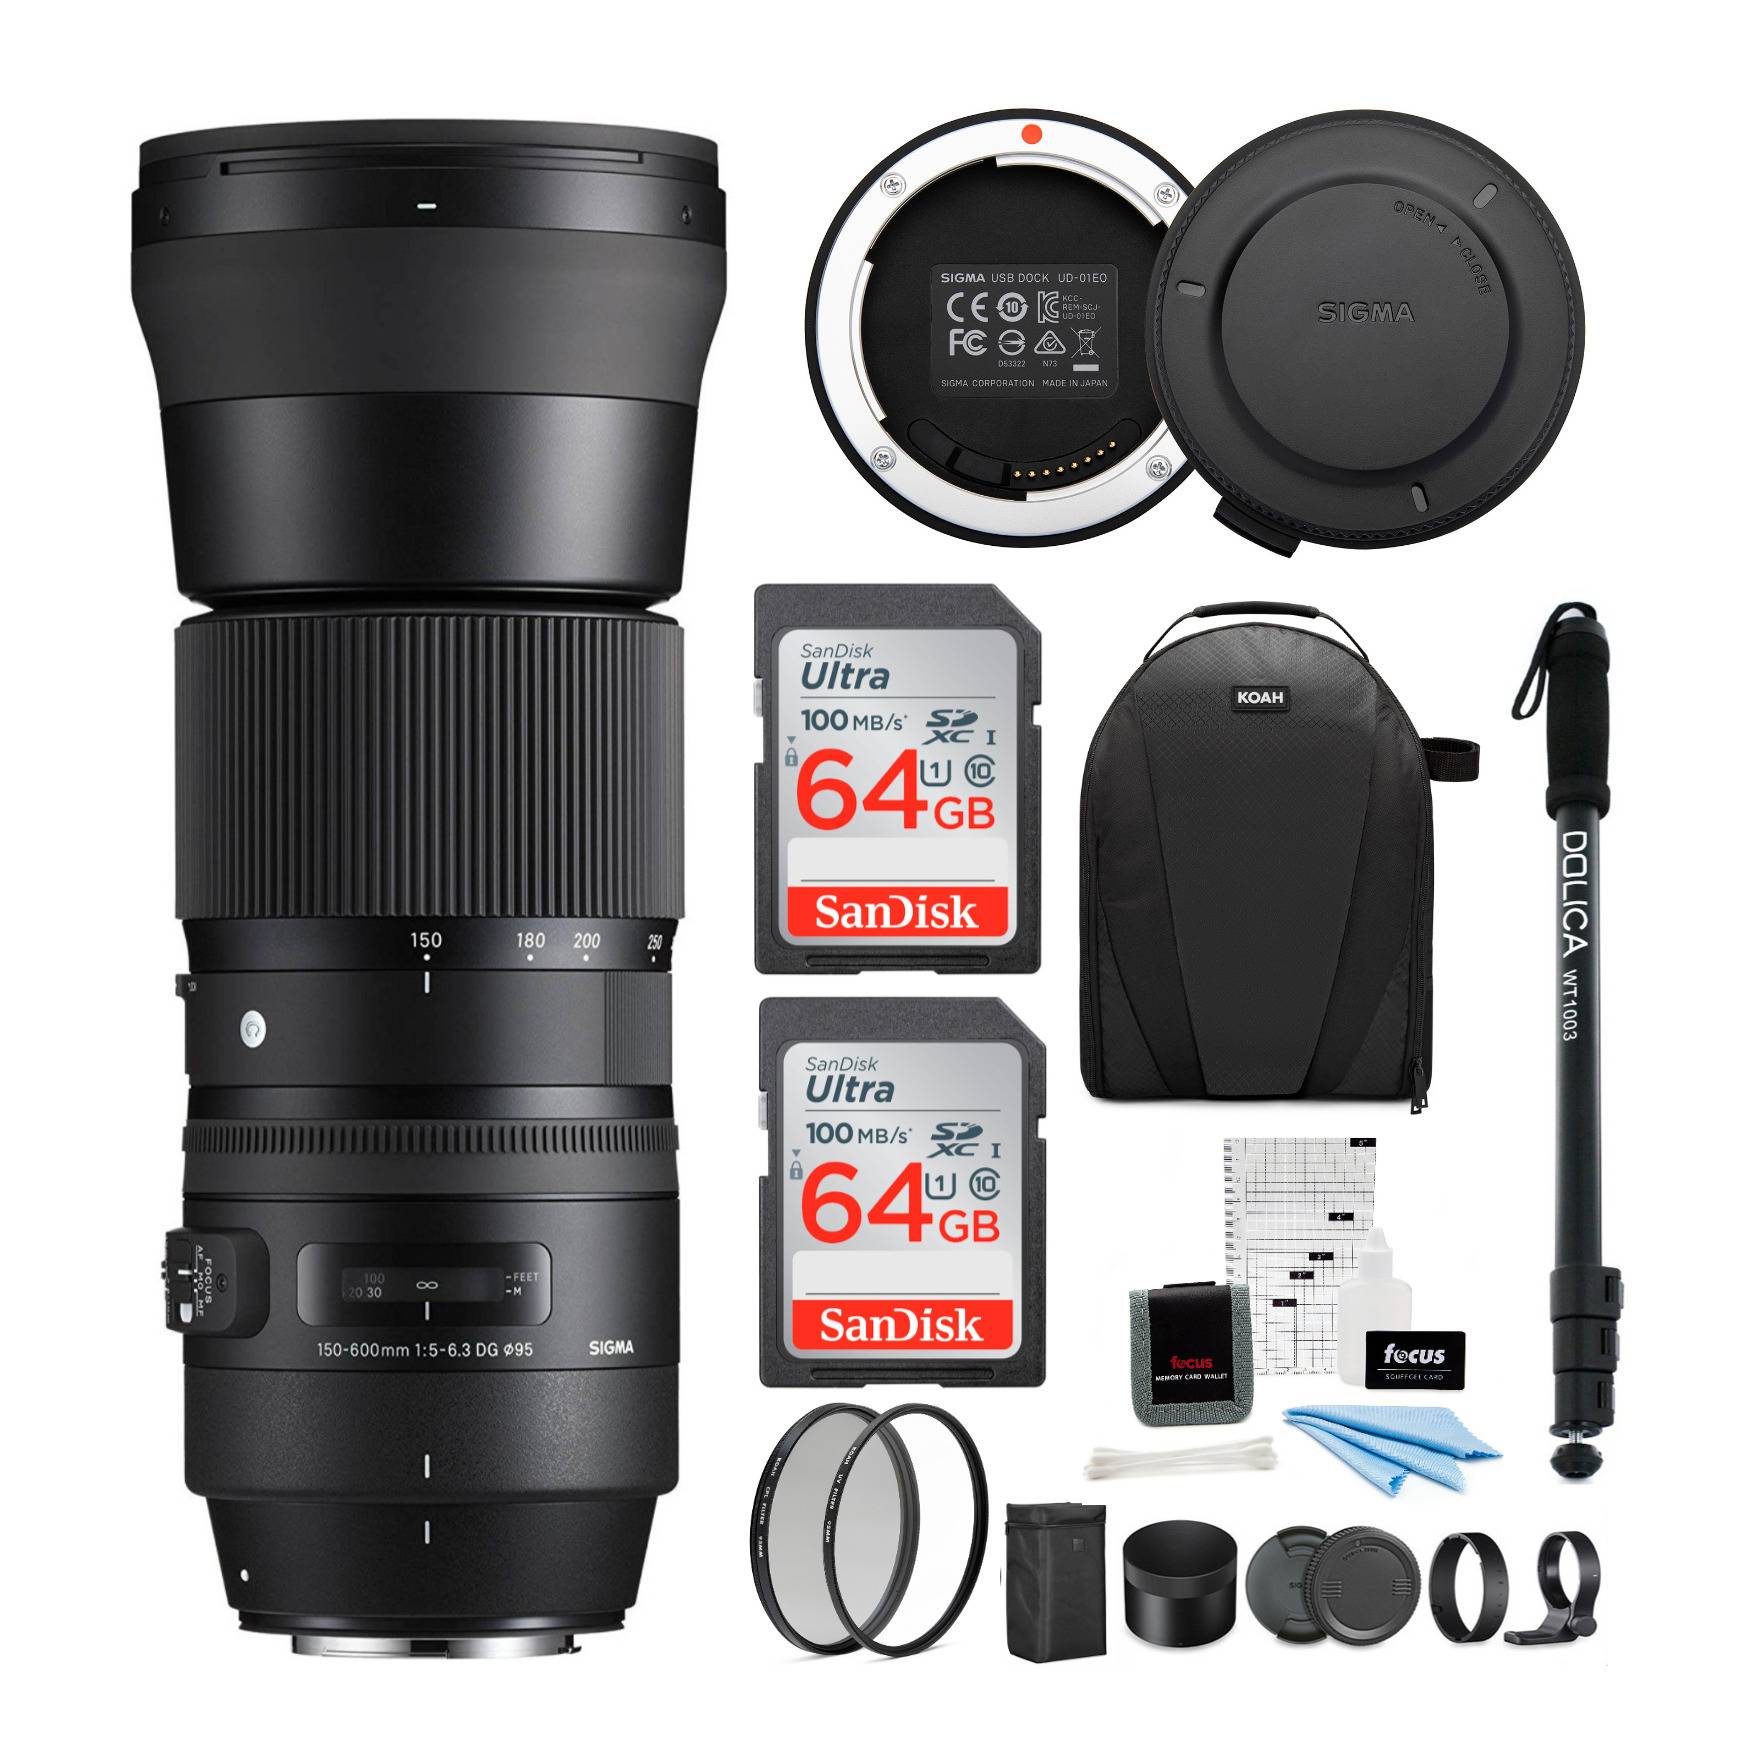 Sigma 150-600mm f/5-6.3 DG OS HSM Contemporary Lens for Nikon with USB Dock and 64GB SD Cards Bundle